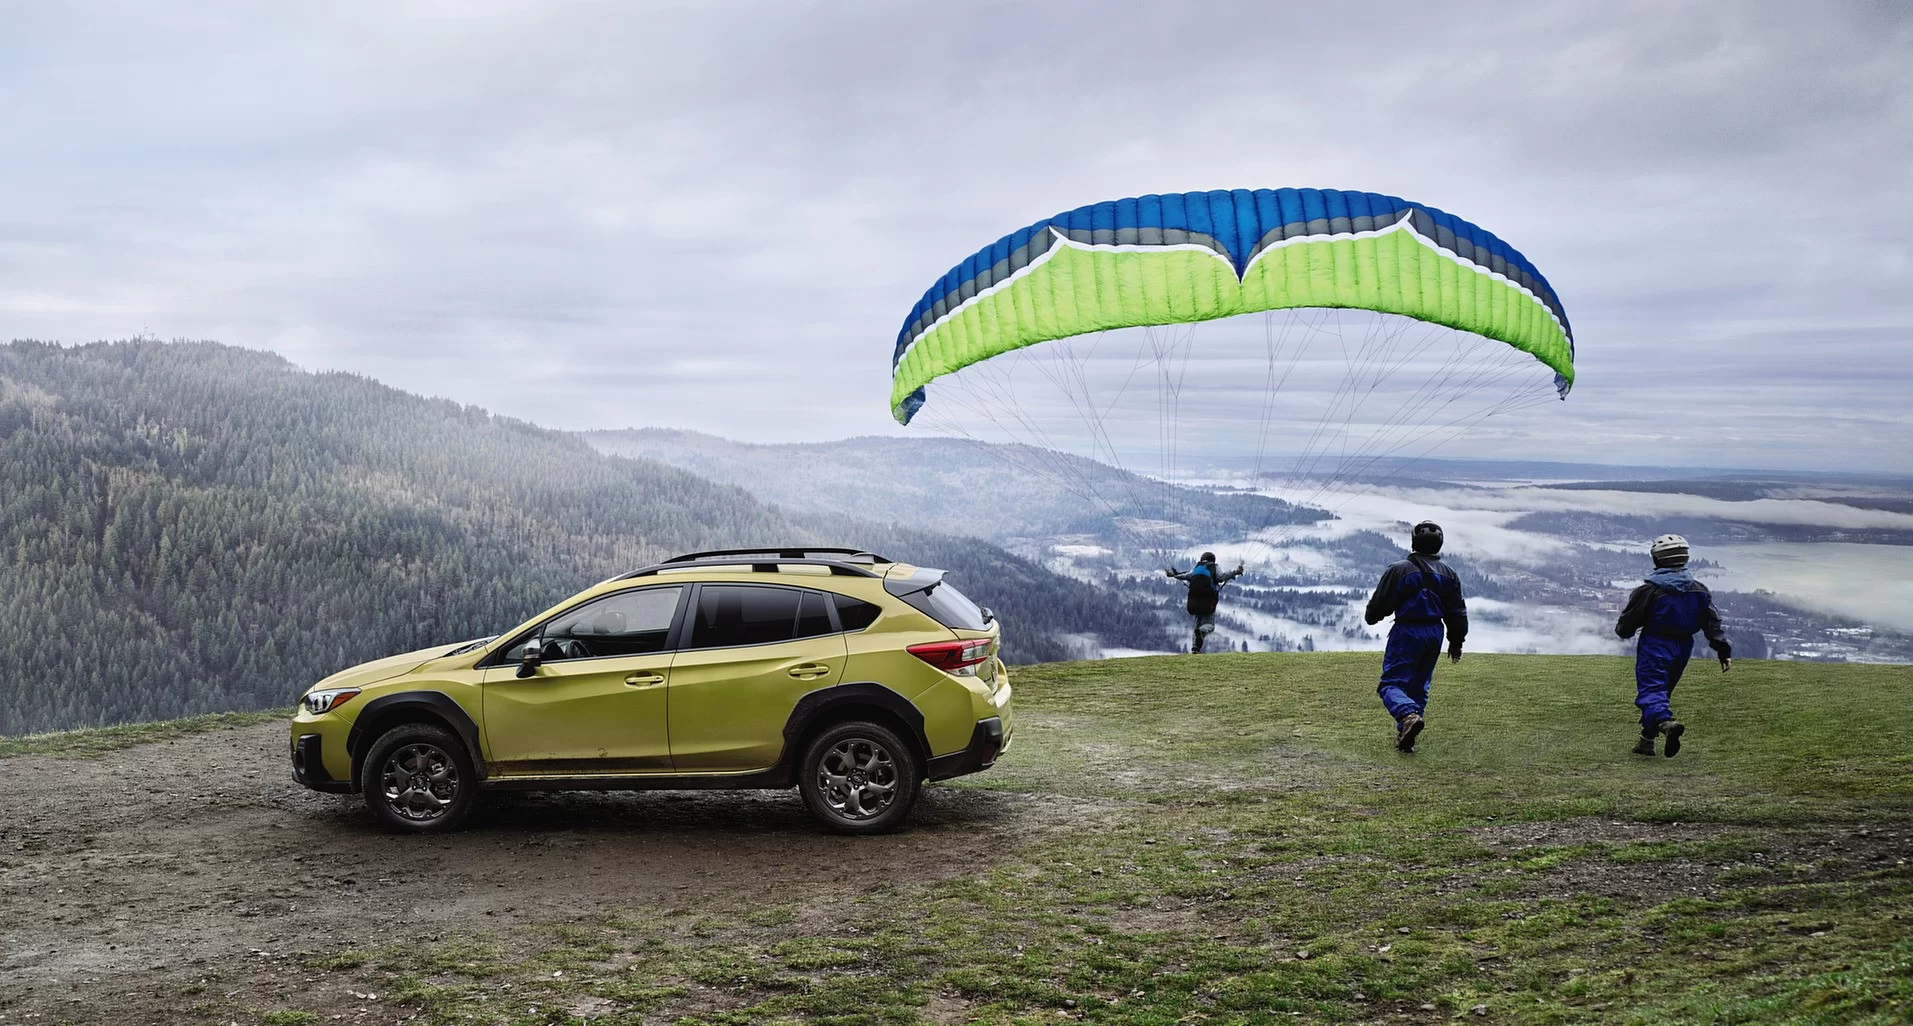 2021-2022 green subaru suv on top of a mountain with people about to do paraglider